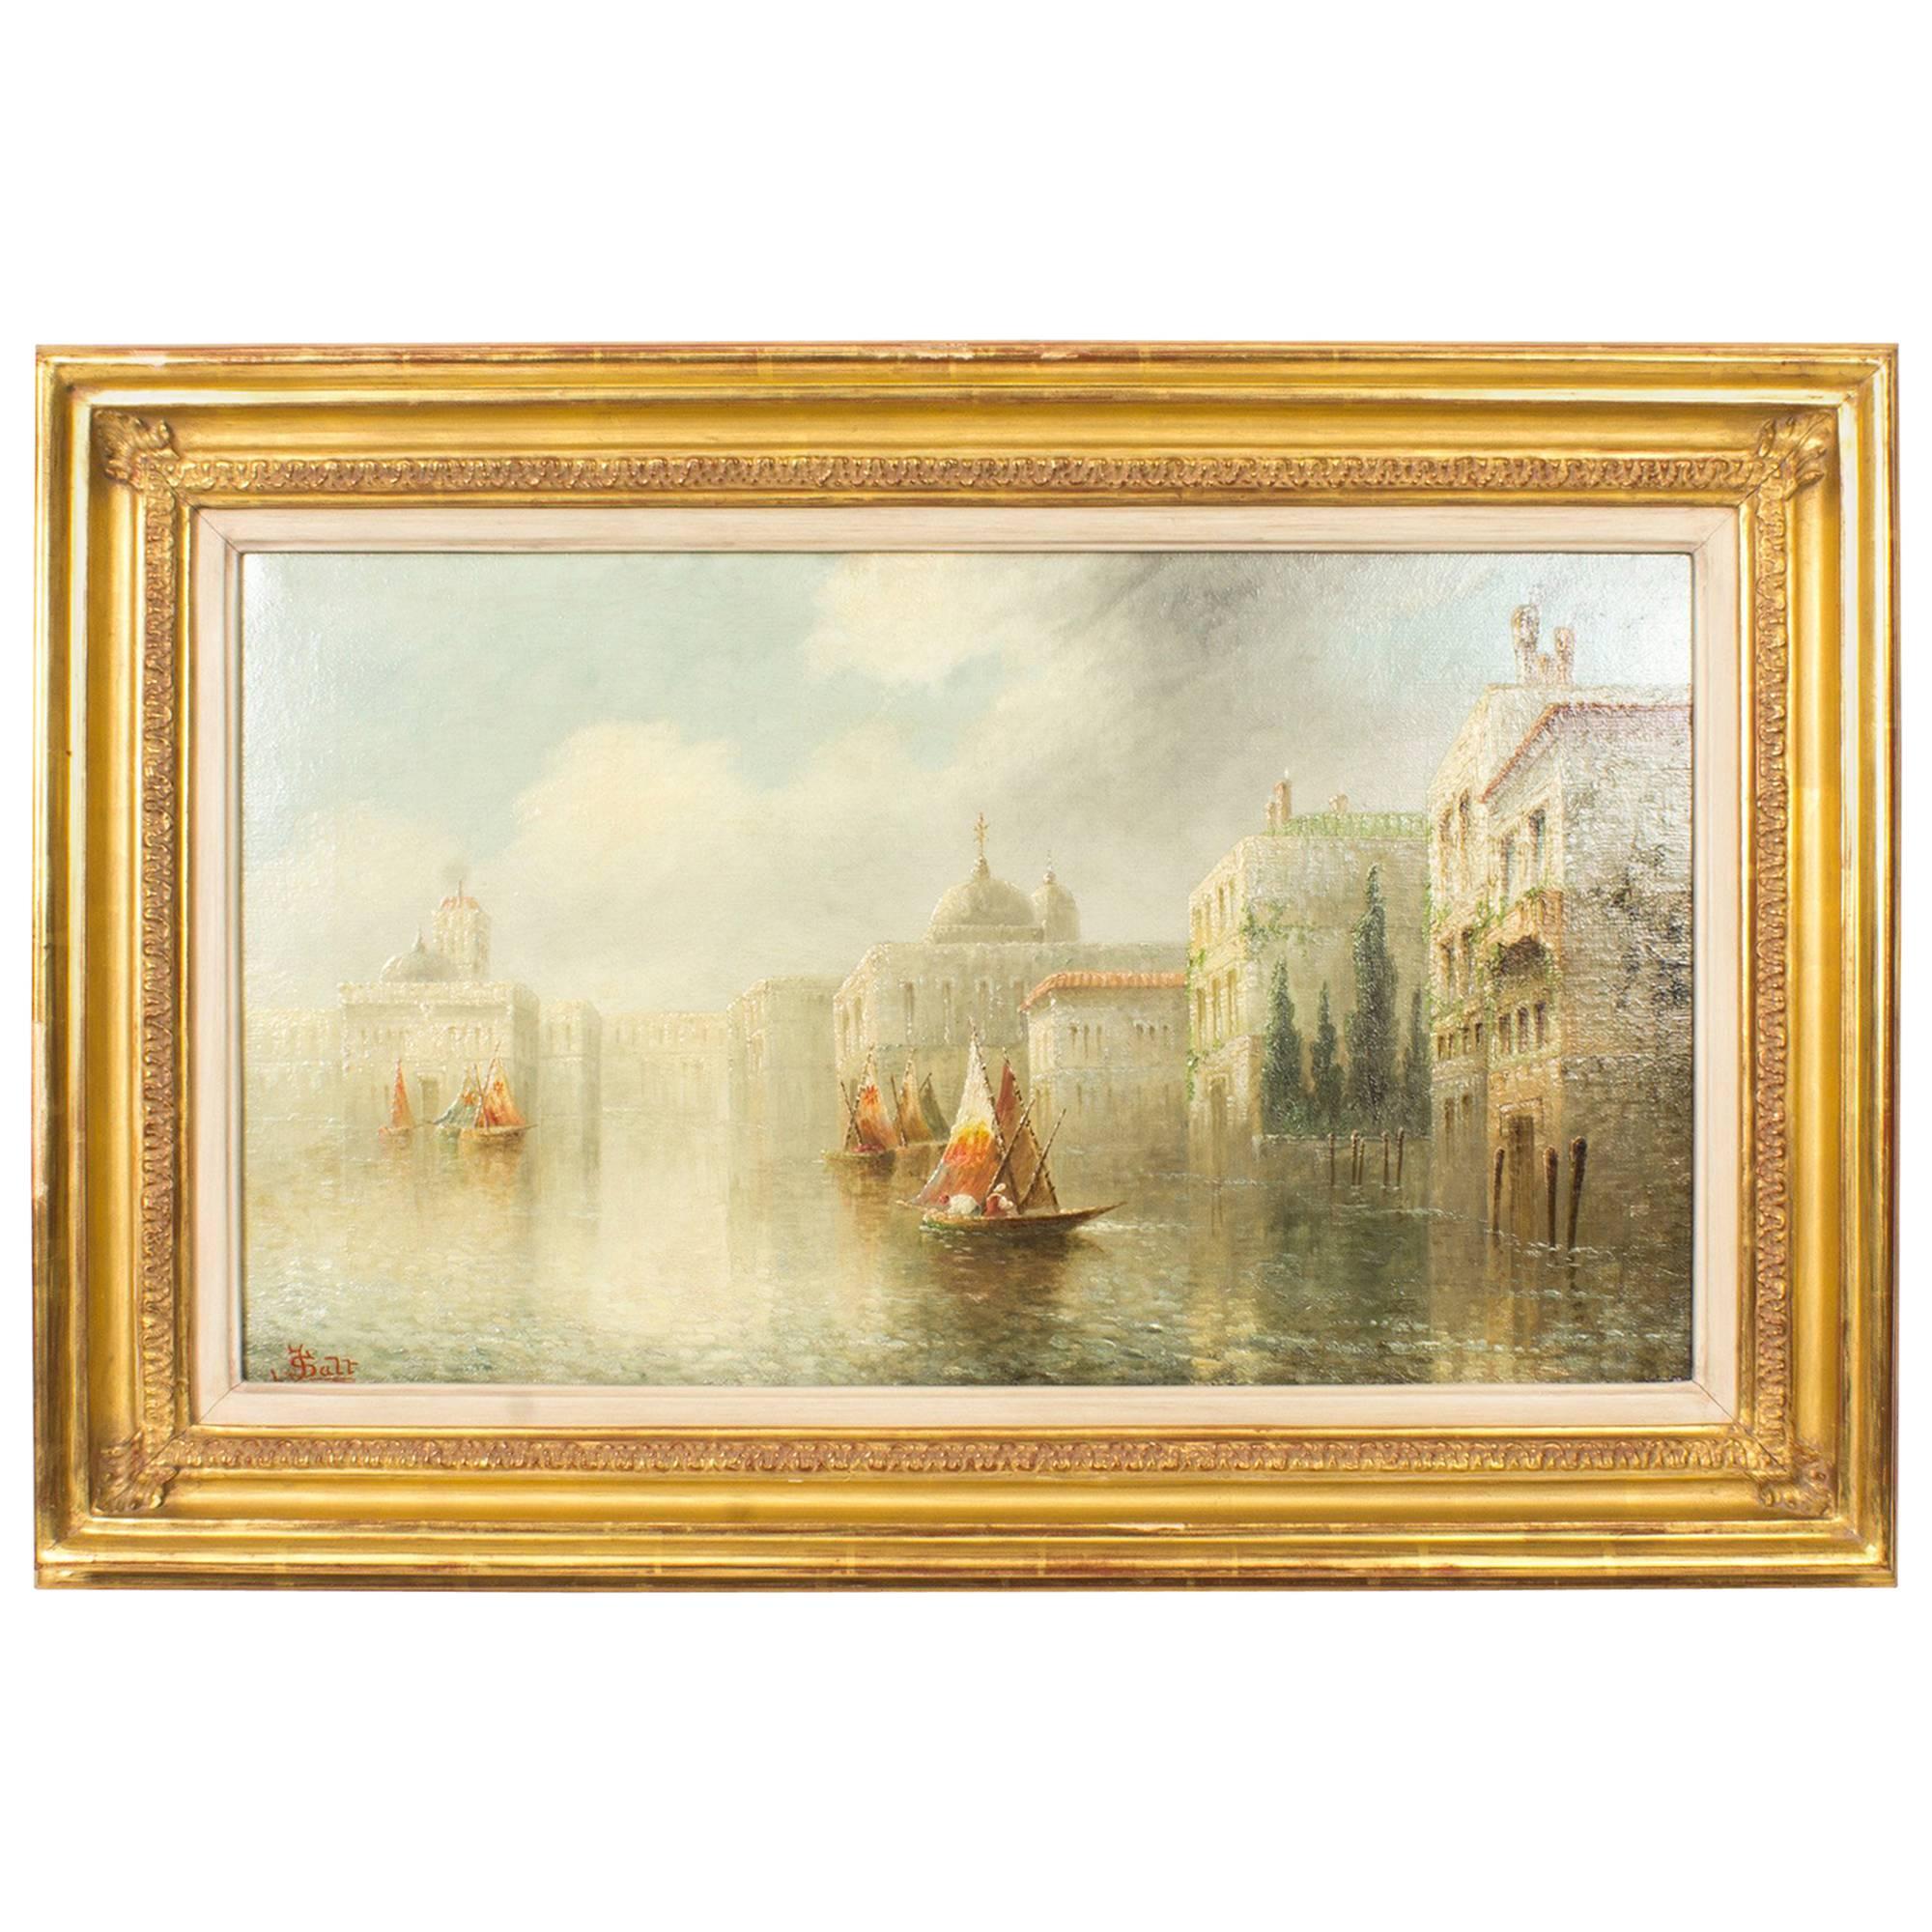 Antique Painting "On the Grand Canal" by James Salt